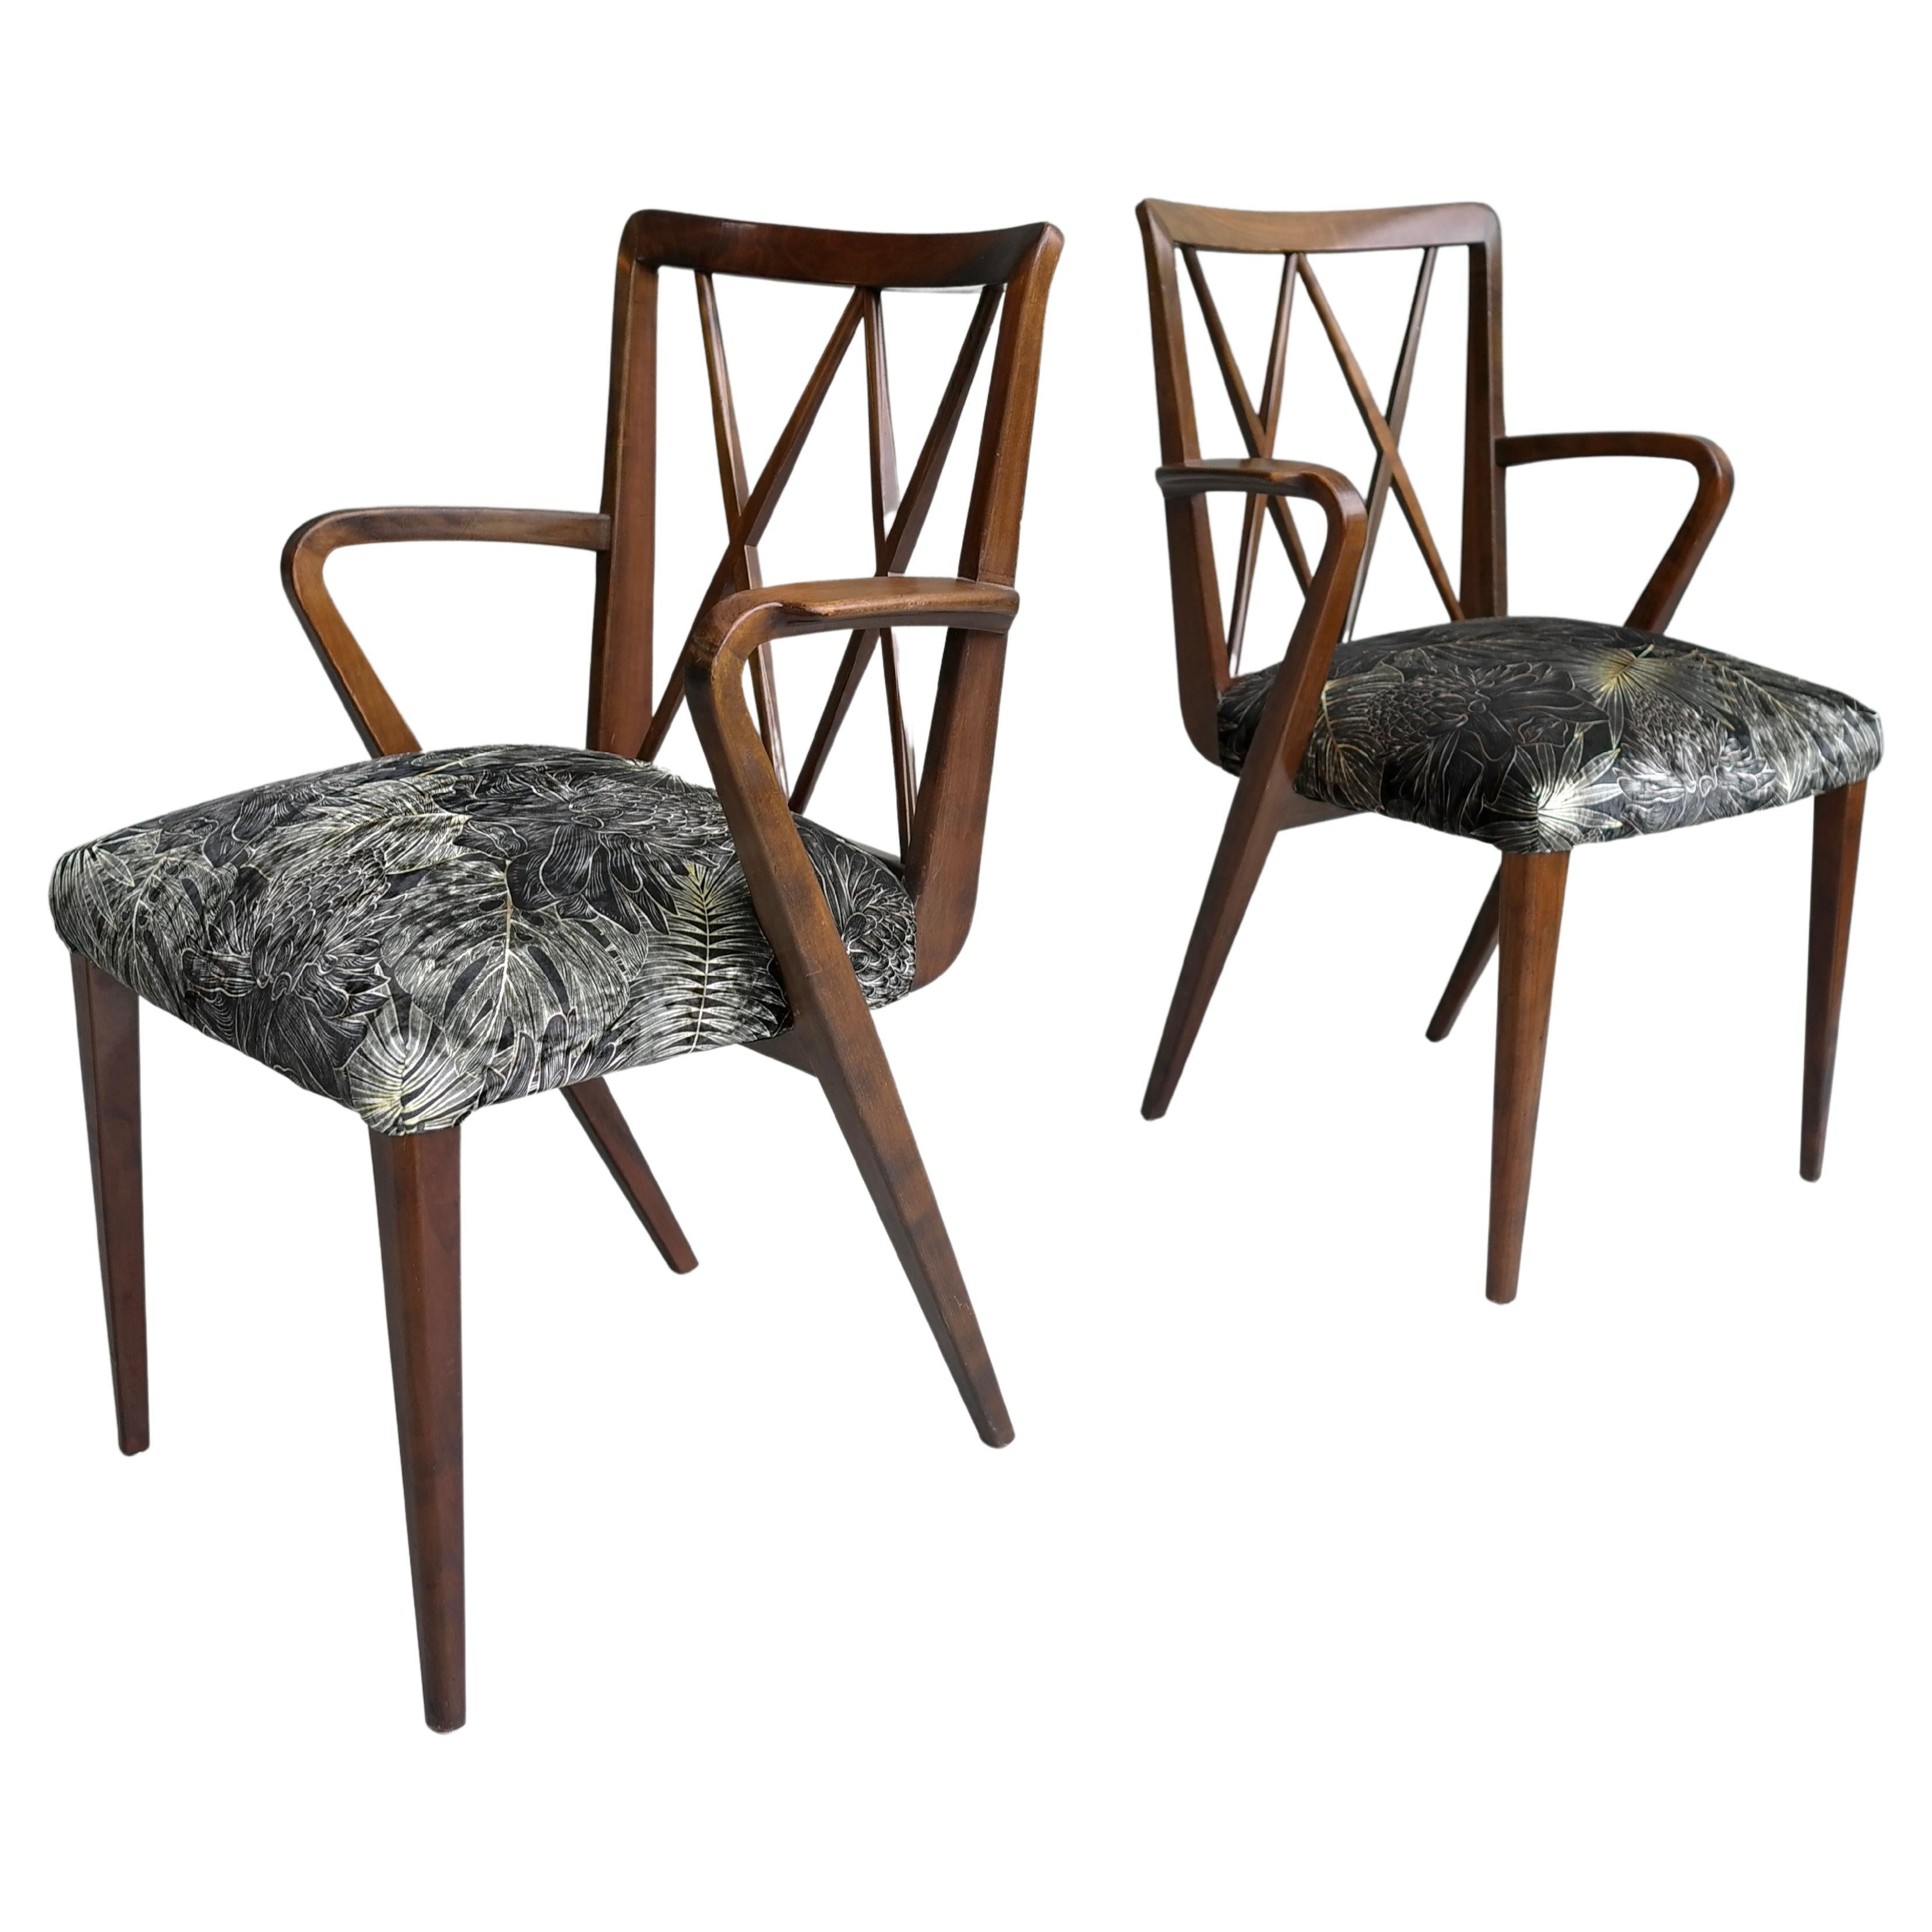 Abraham A Patijn Poly-Z Tropical side Chairs in Walnut, The Netherlands, 1950s For Sale